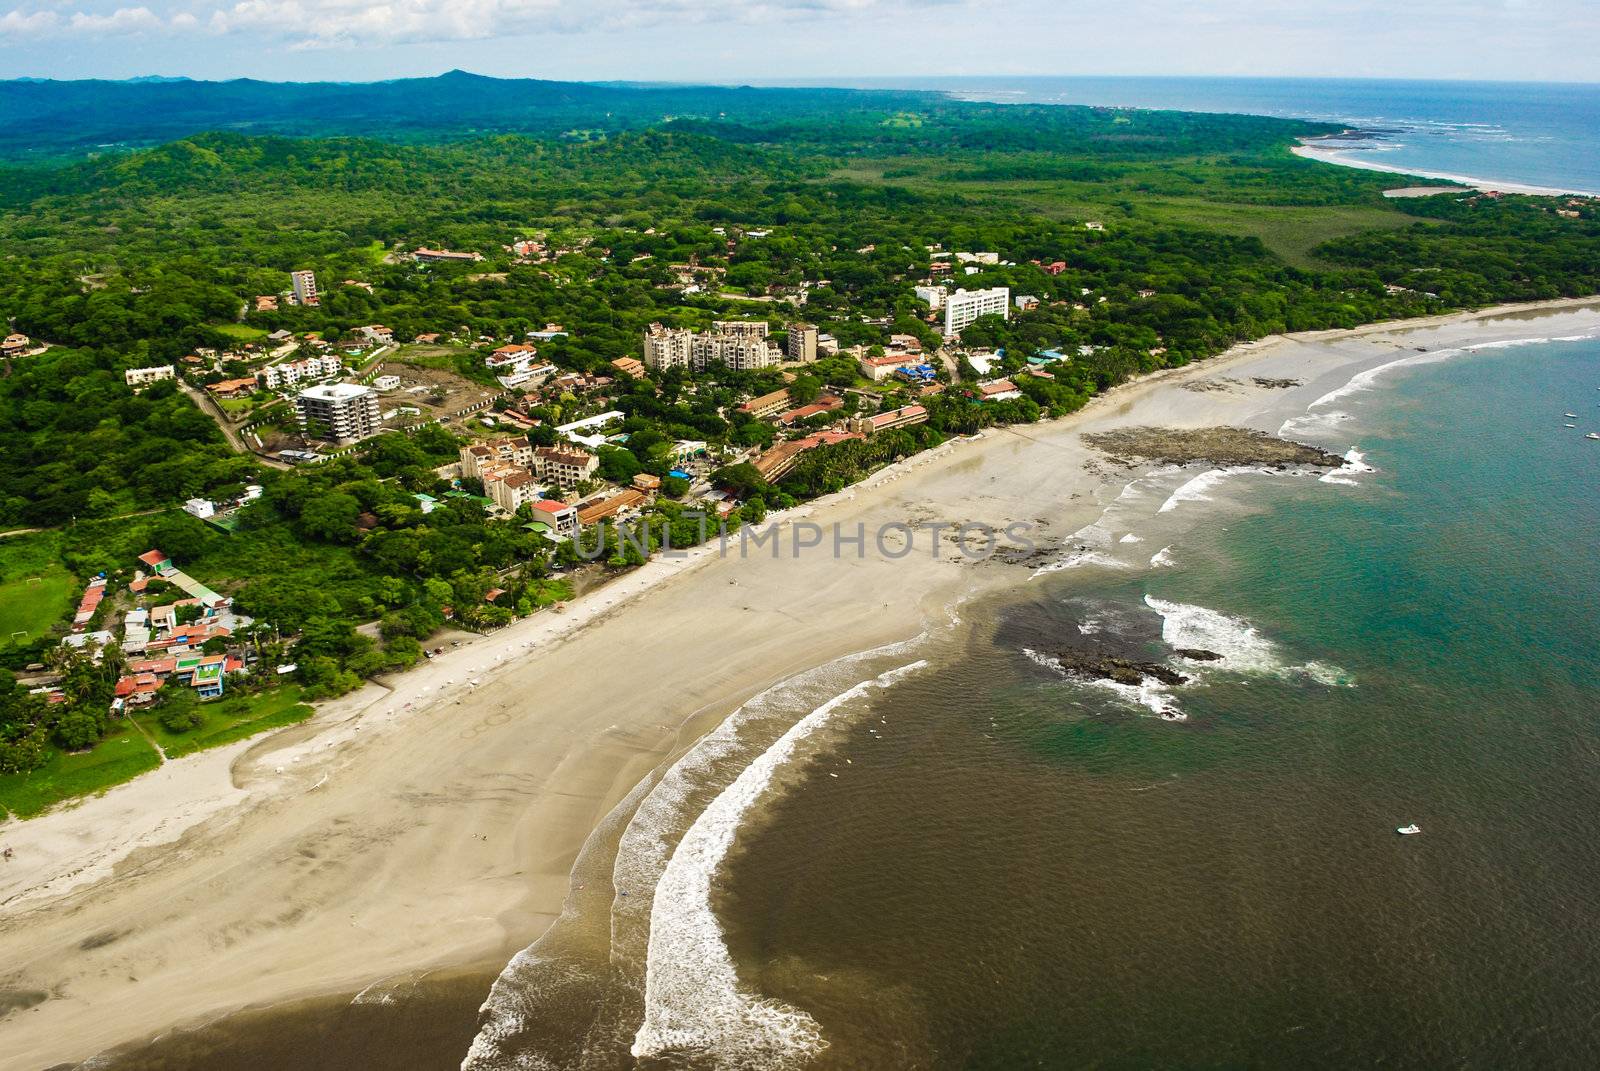 Photograph of a Costa Rican Resort town taken from the air.  Resort located on the Pacific Ocean.